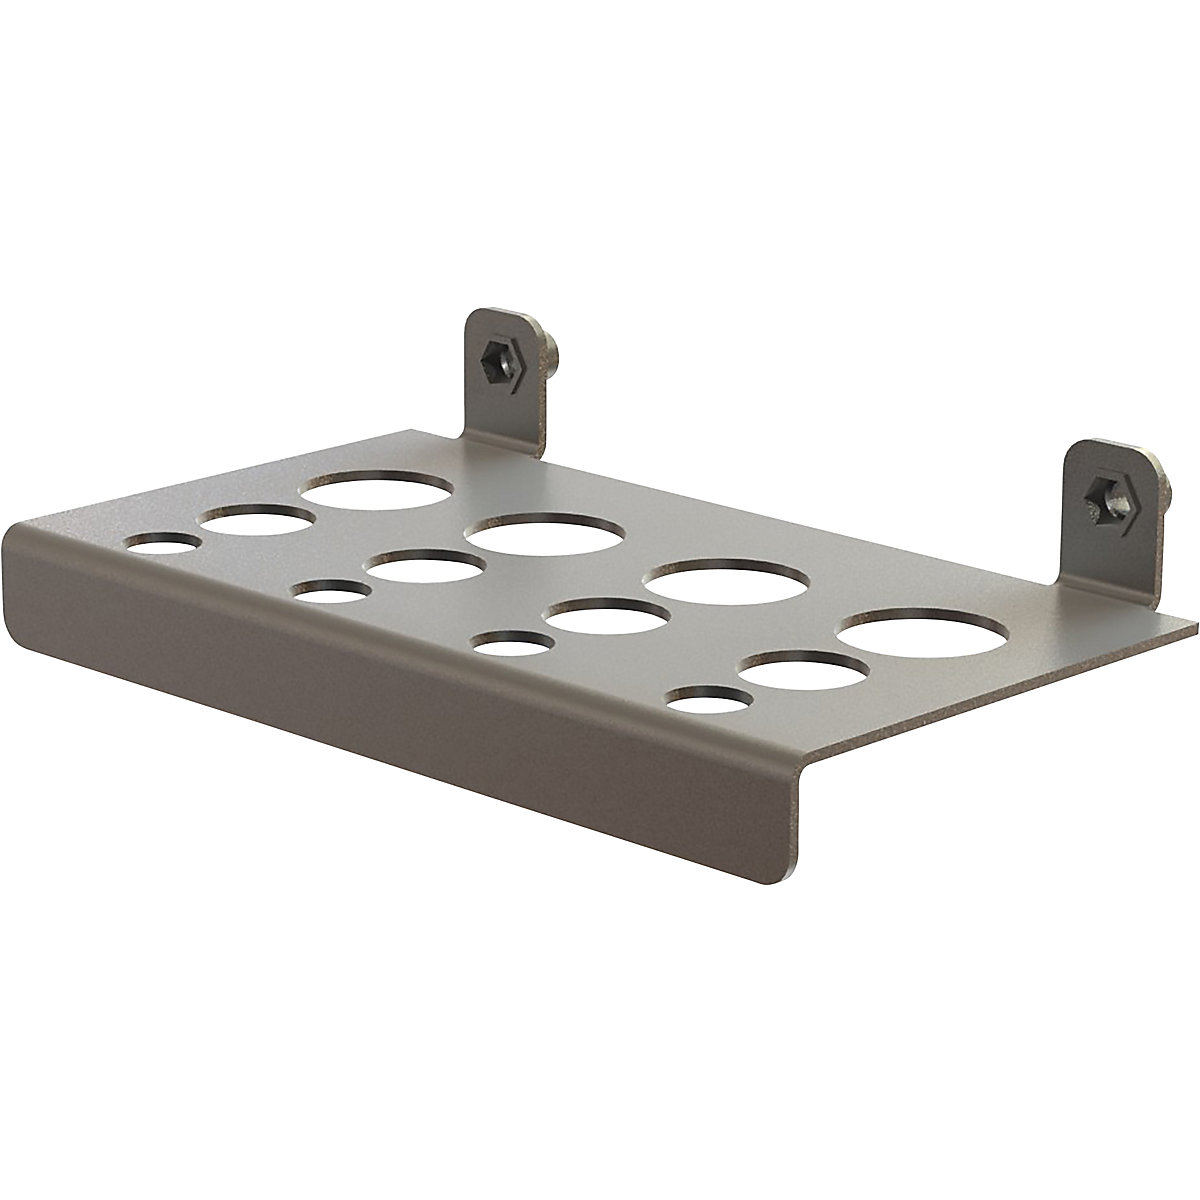 Stainless steel tool holder for screwdrivers